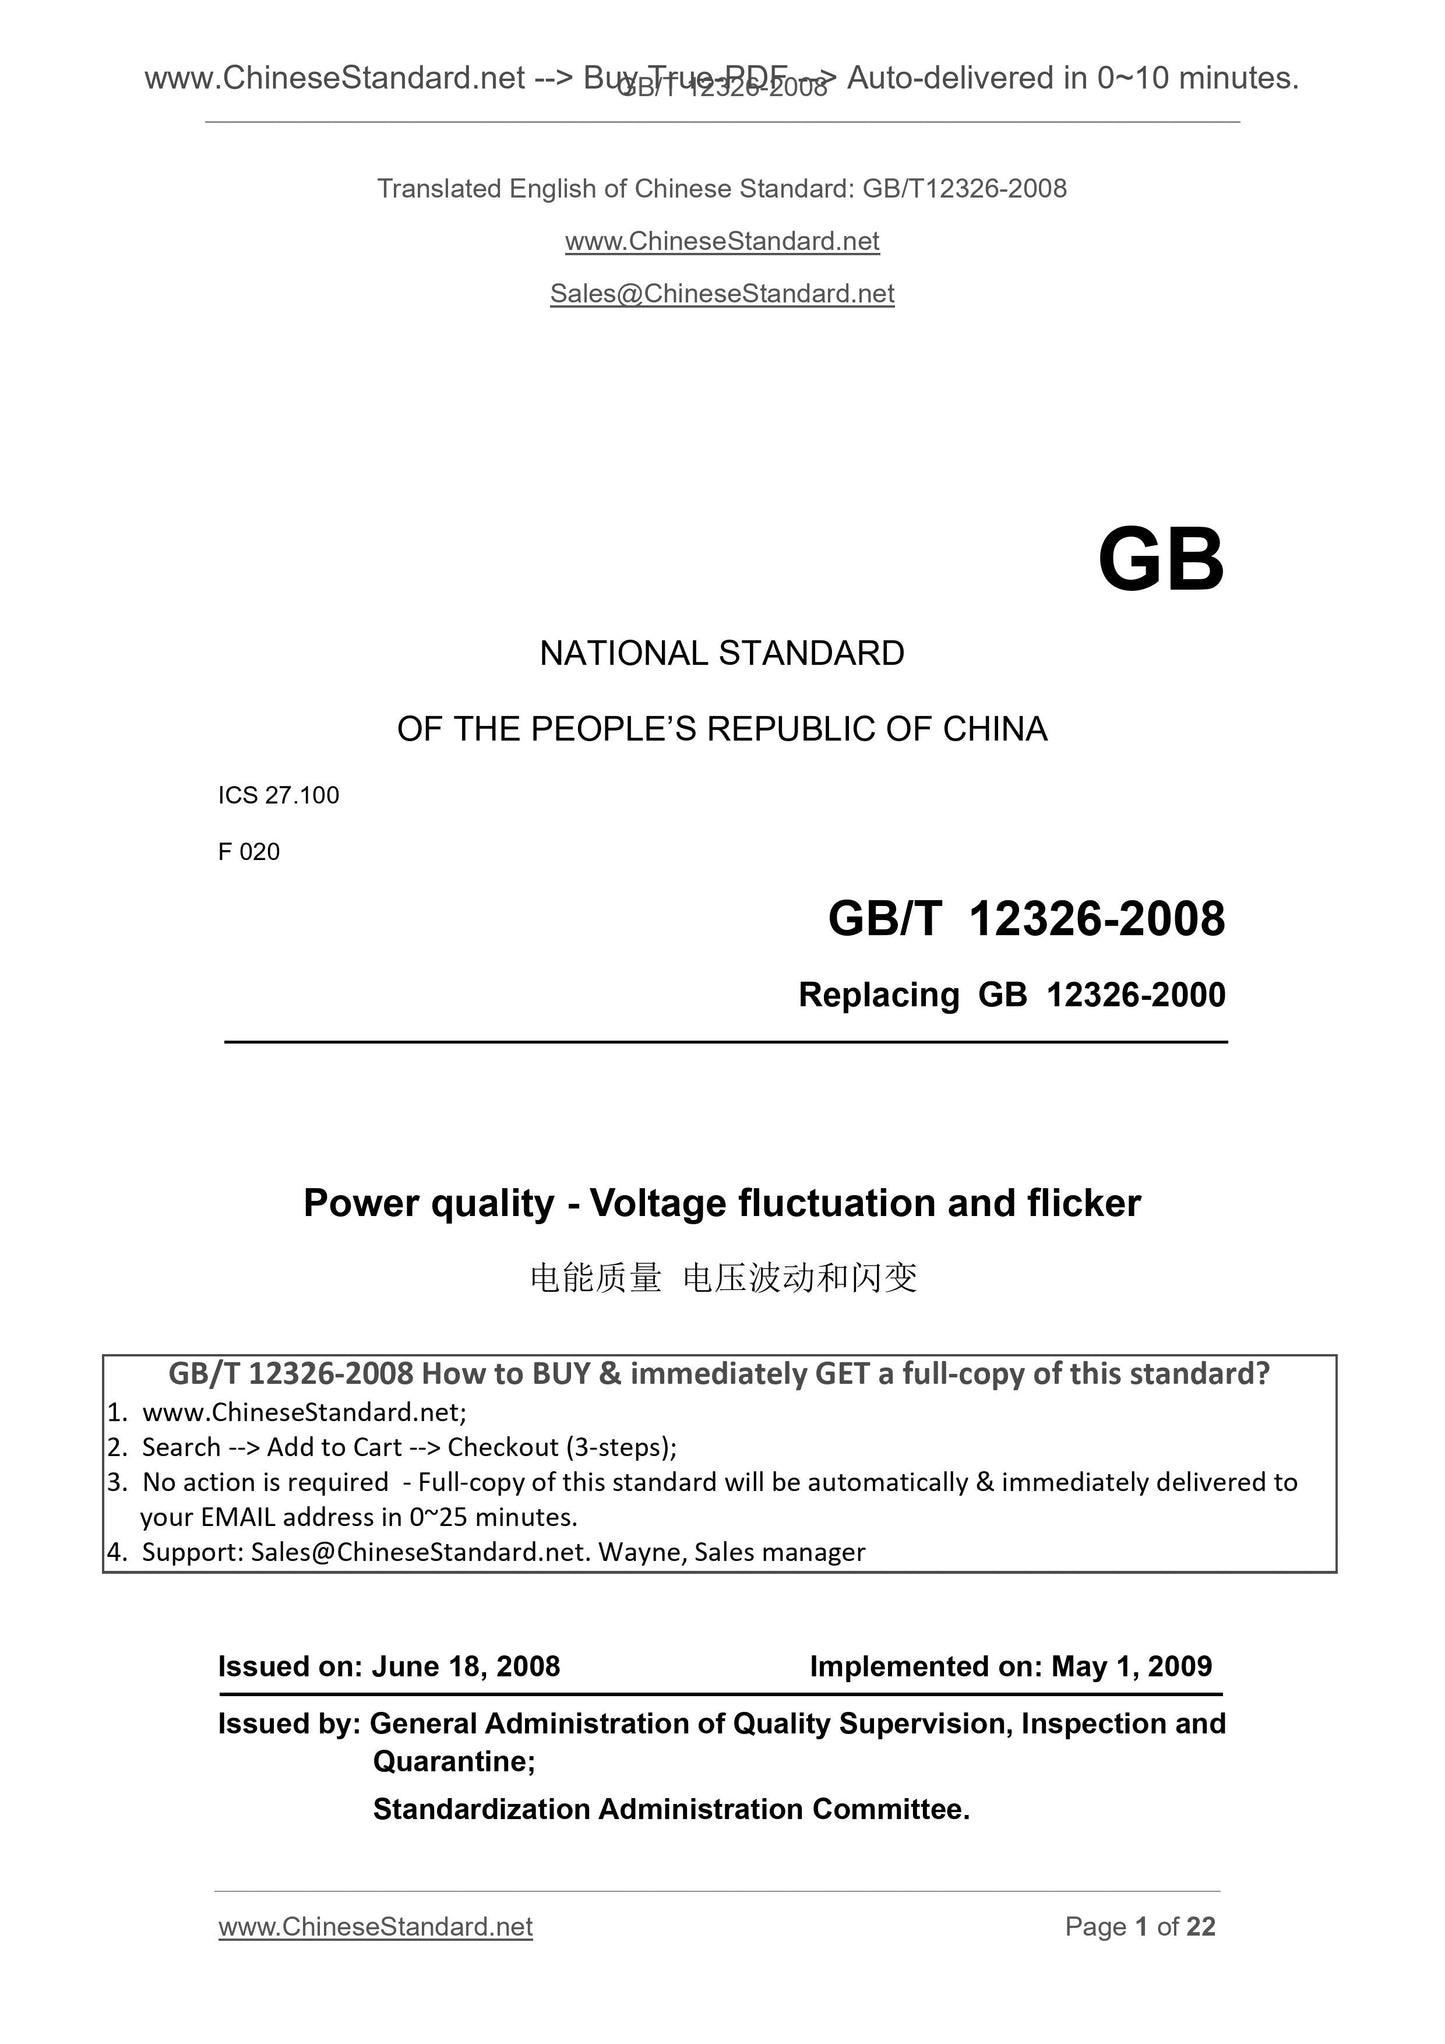 GB/T 12326-2008 Page 1